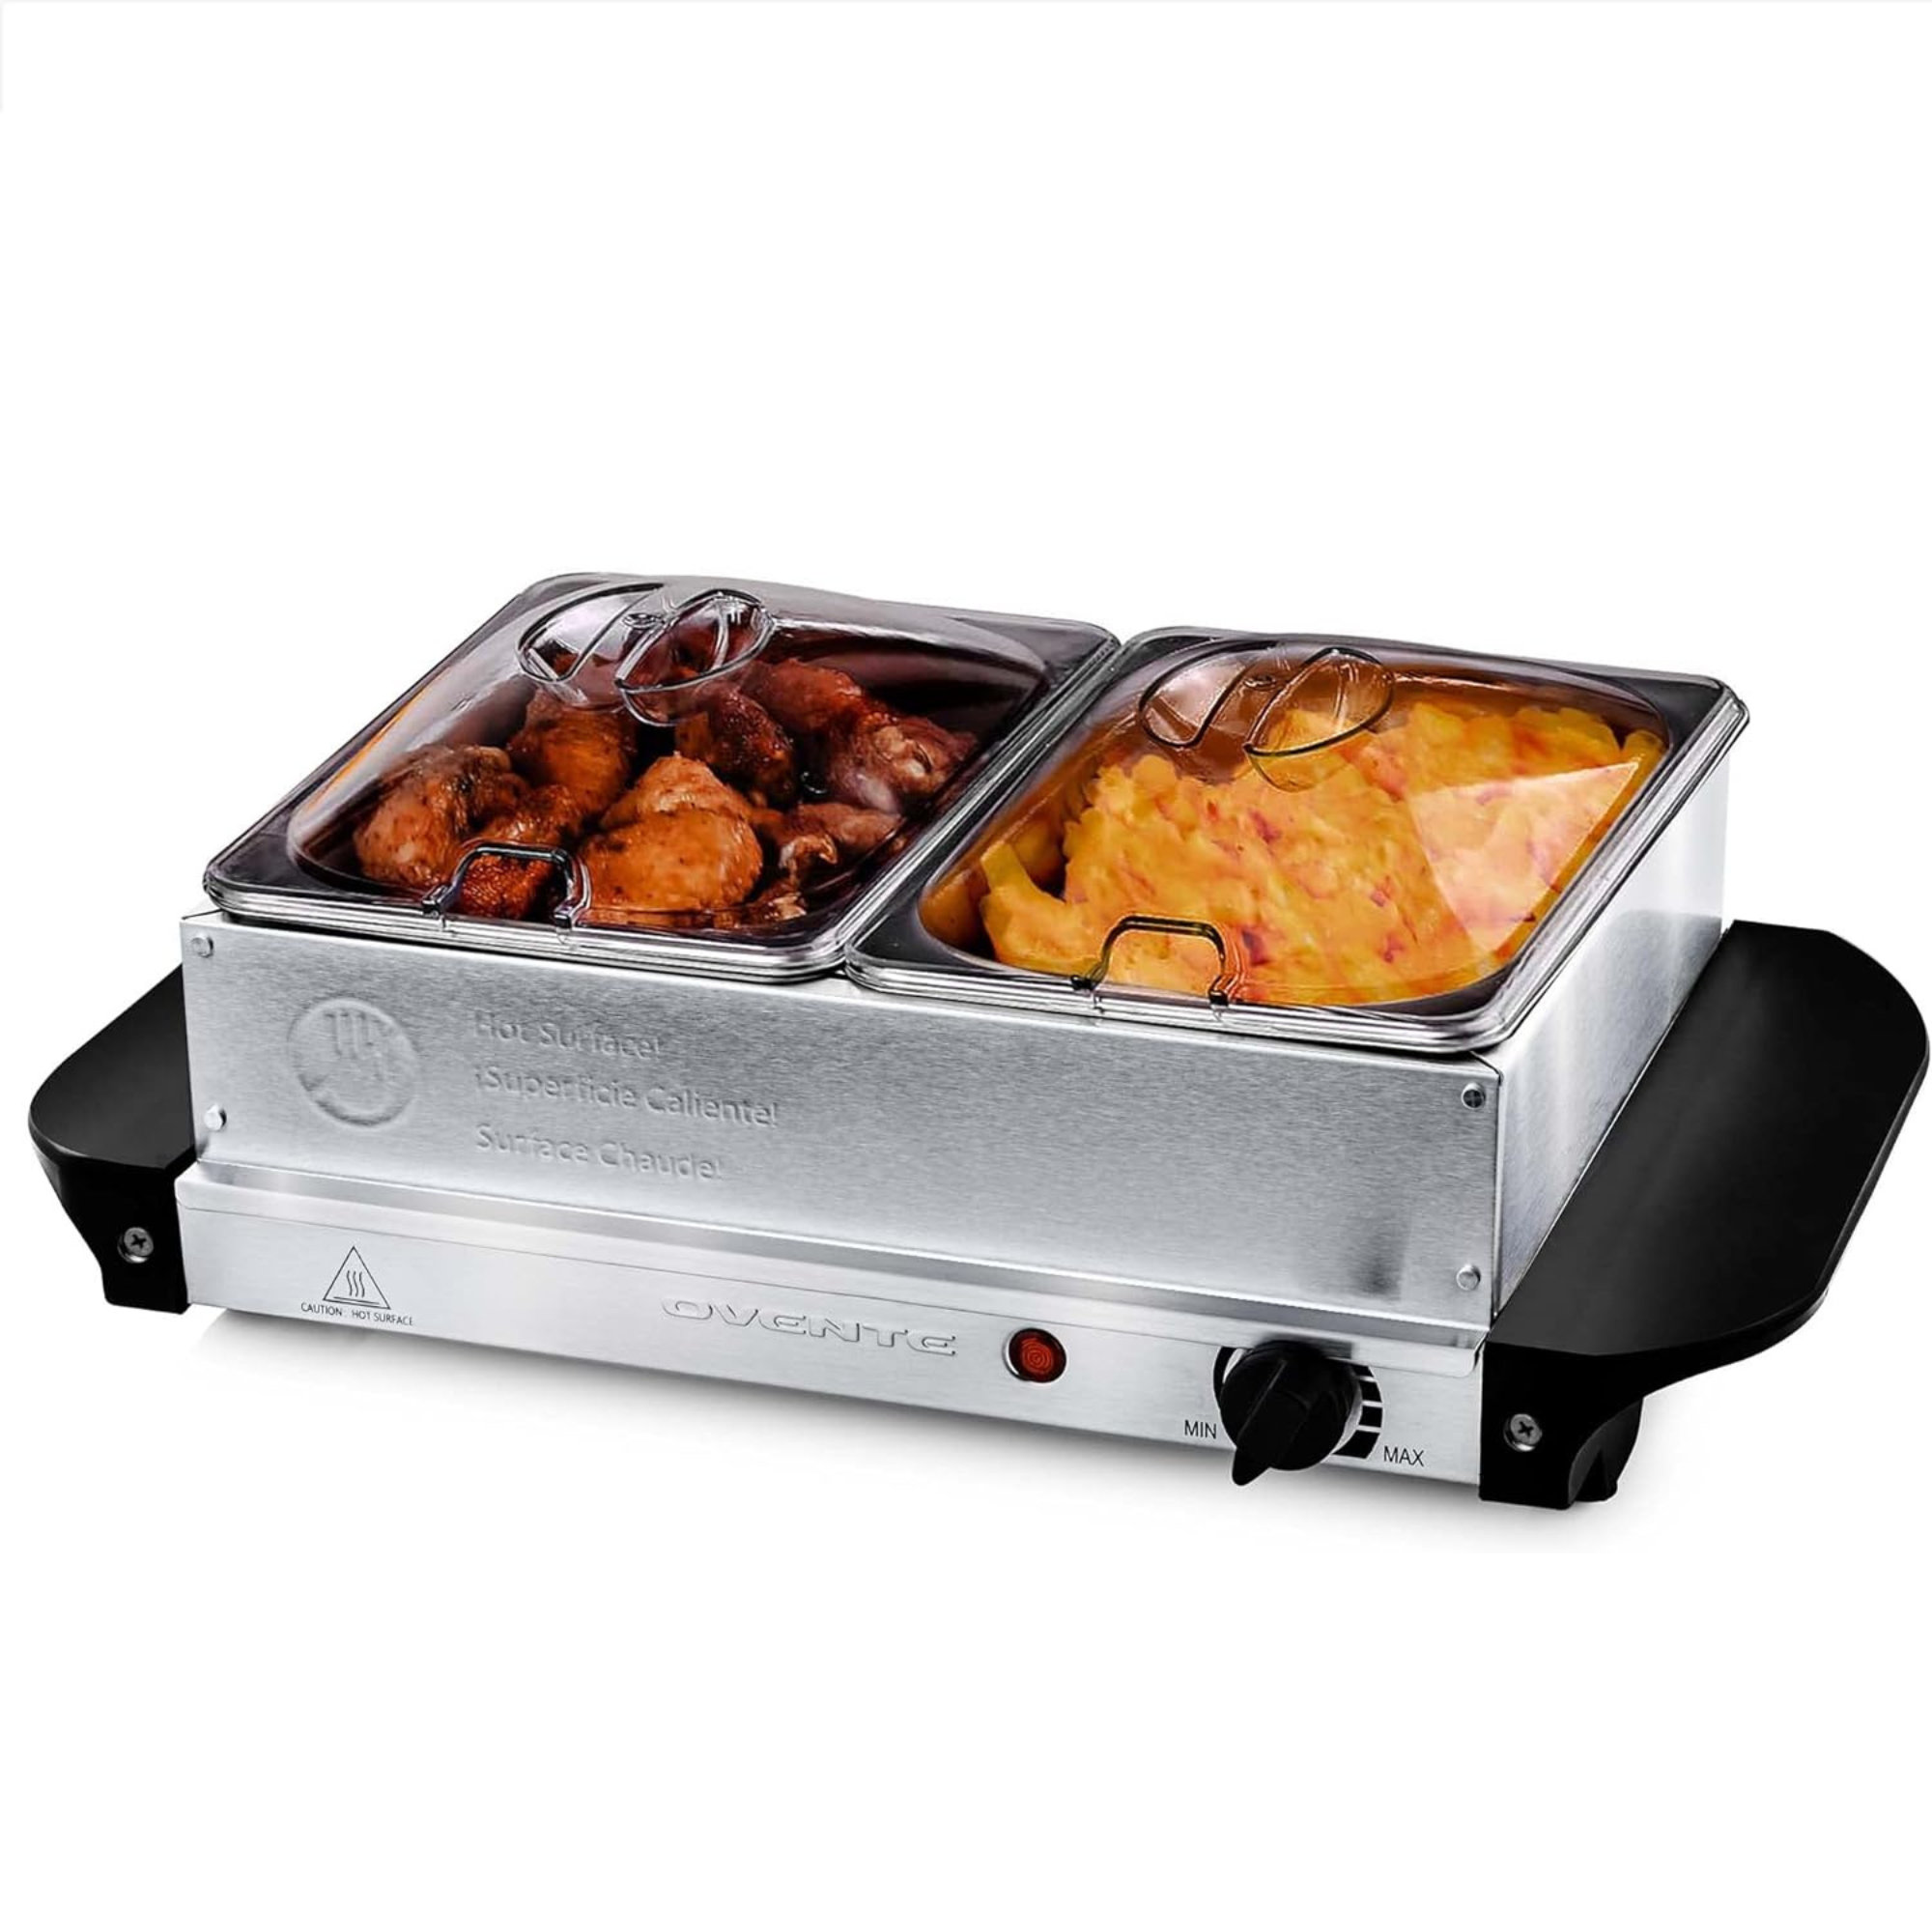 Nutrichef Portable 3 Pot Electric Hot Plate Buffet Warmer Chafing